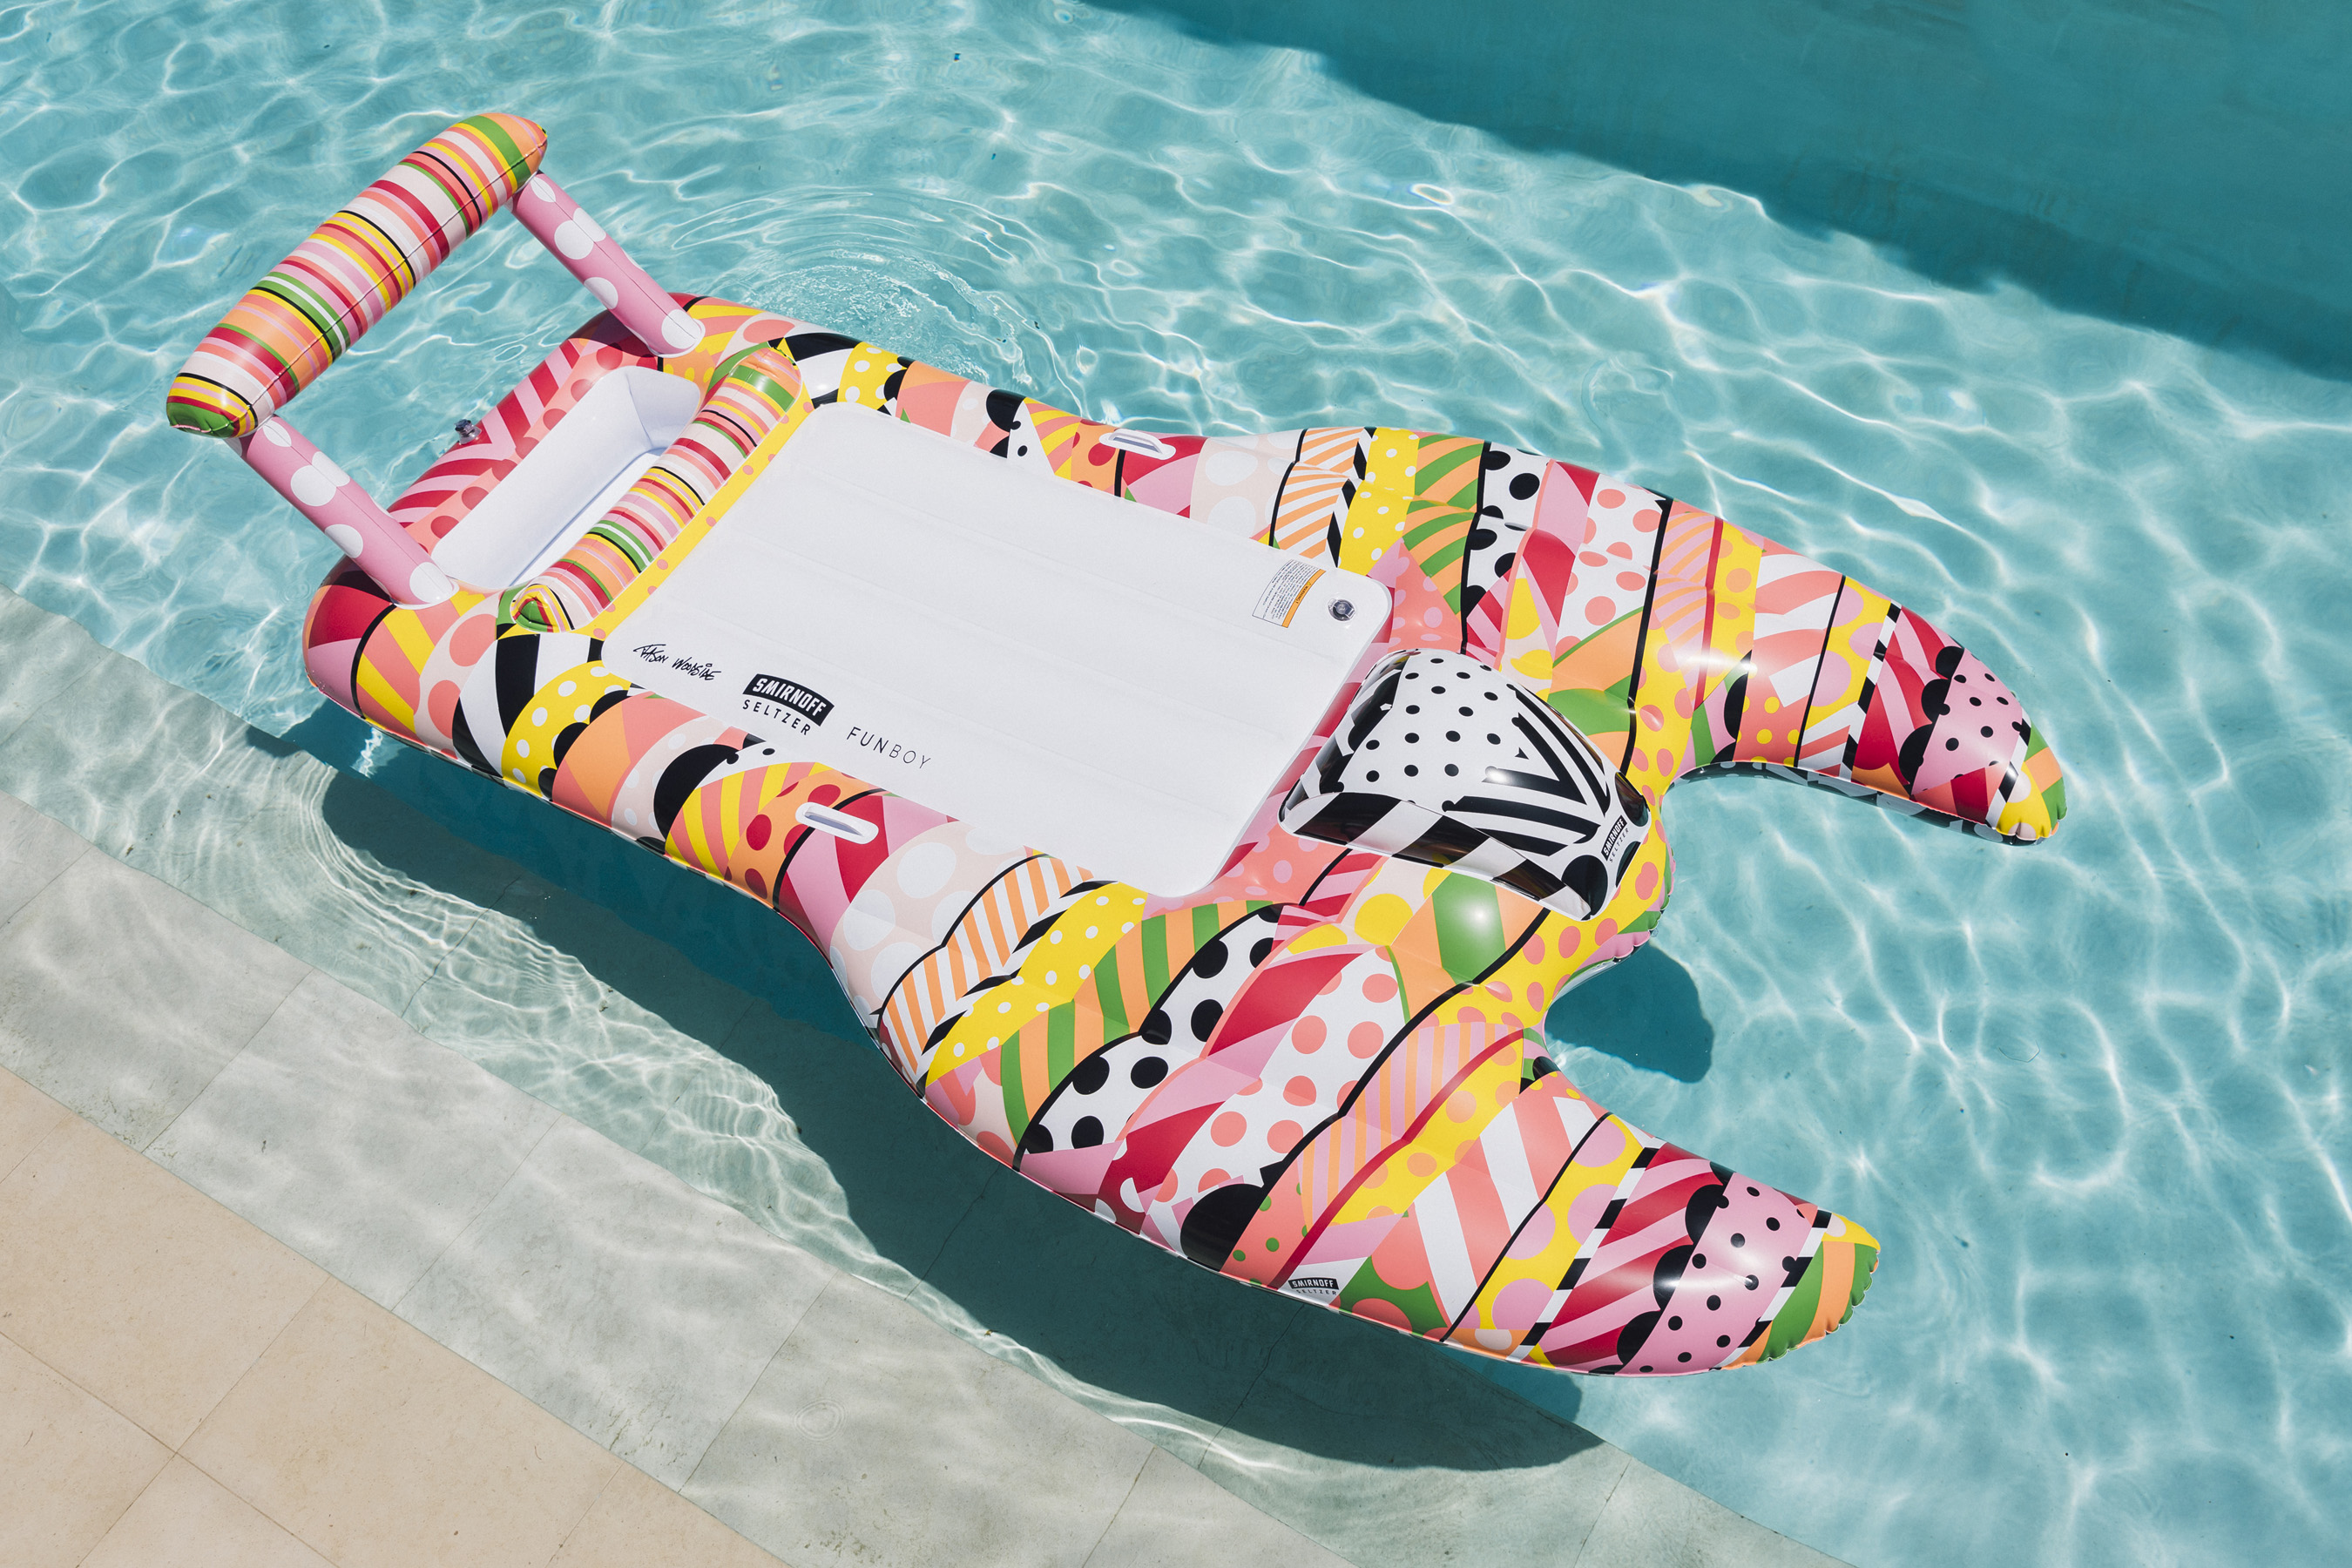 Smirnoff Seltzer and FUNBOY collaborated with acclaimed artist Jason Woodside to design this one-of-a-kind hydroplane pool float, inspired by the delicious Smirnoff Seltzer flavors.